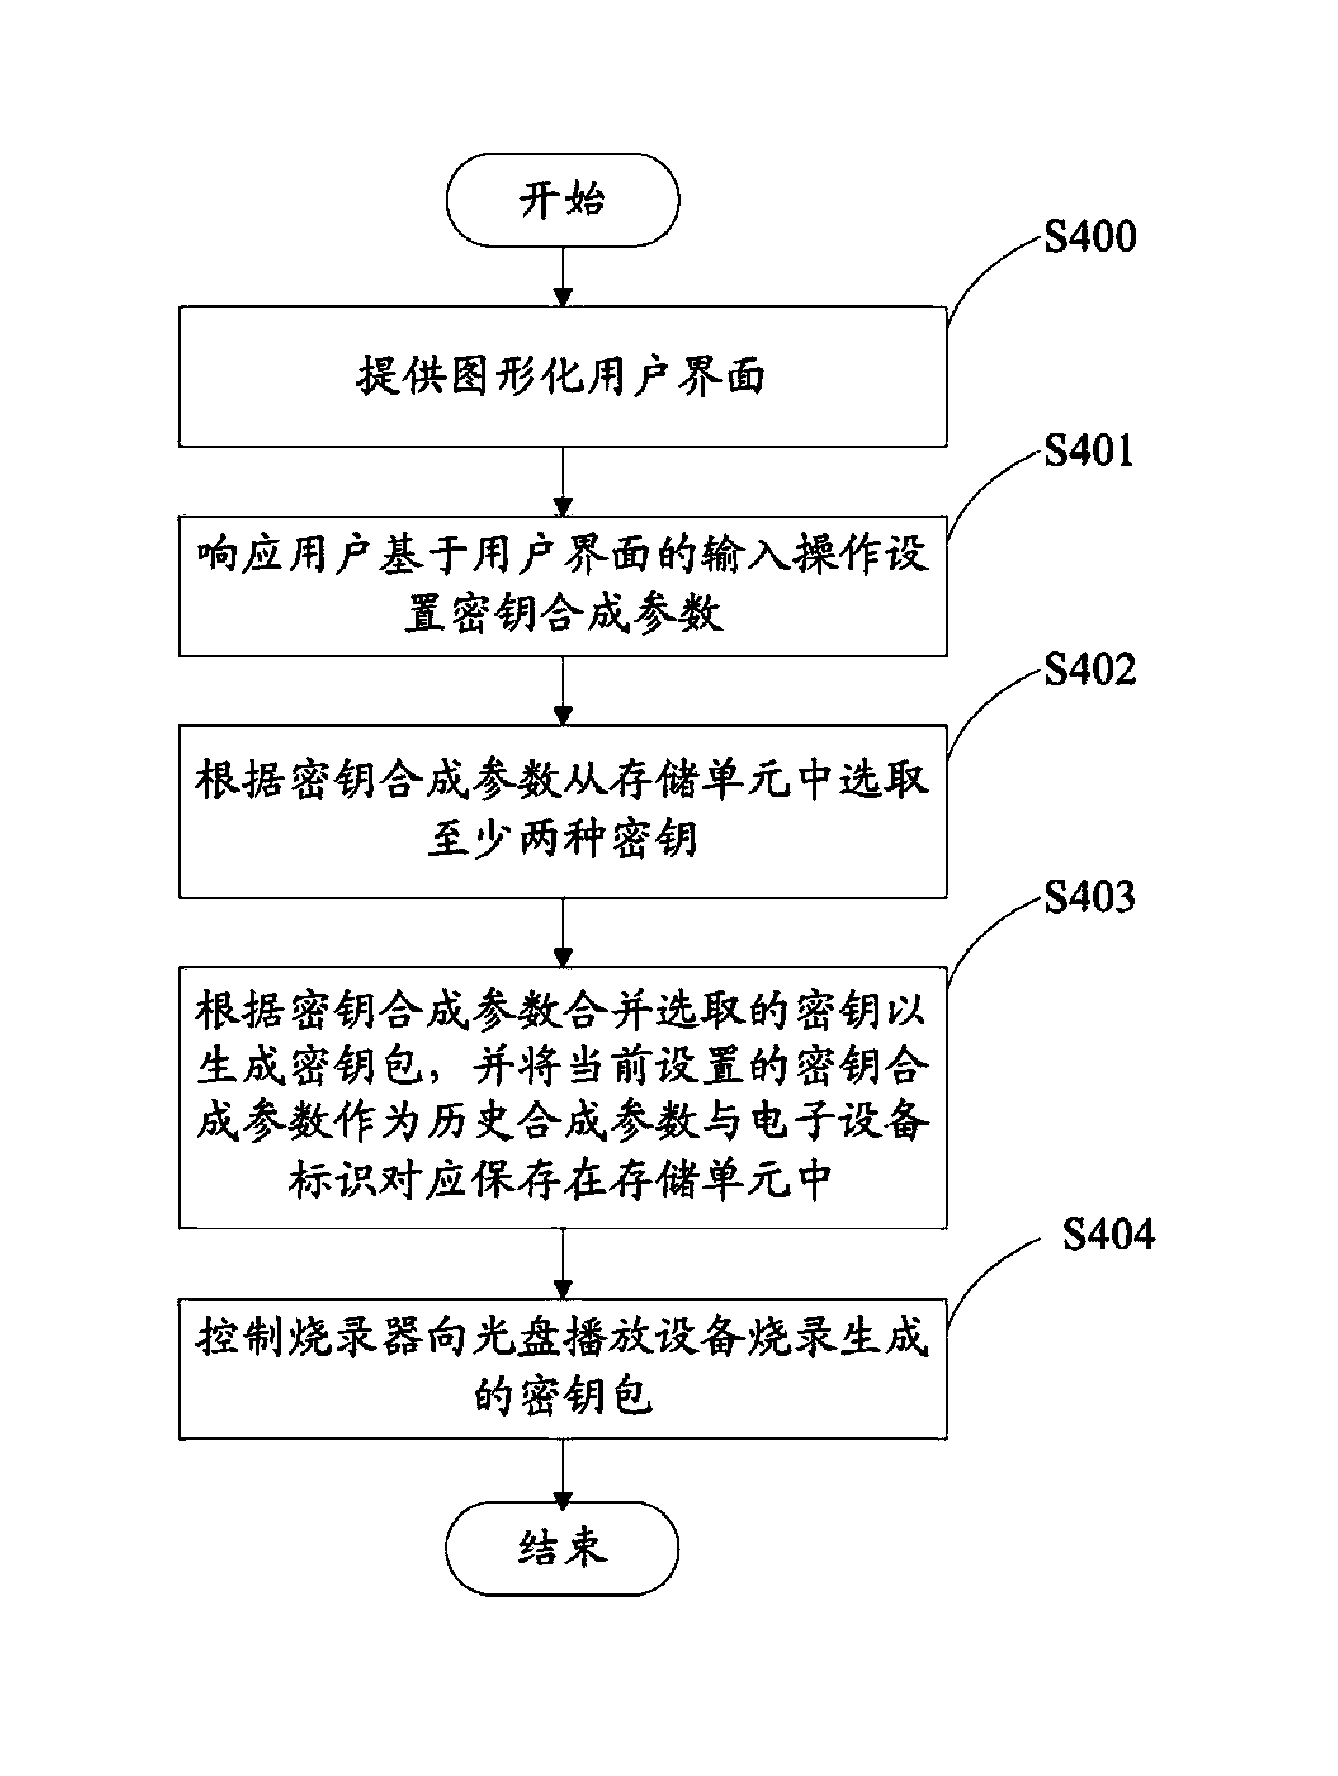 Burning control device and method